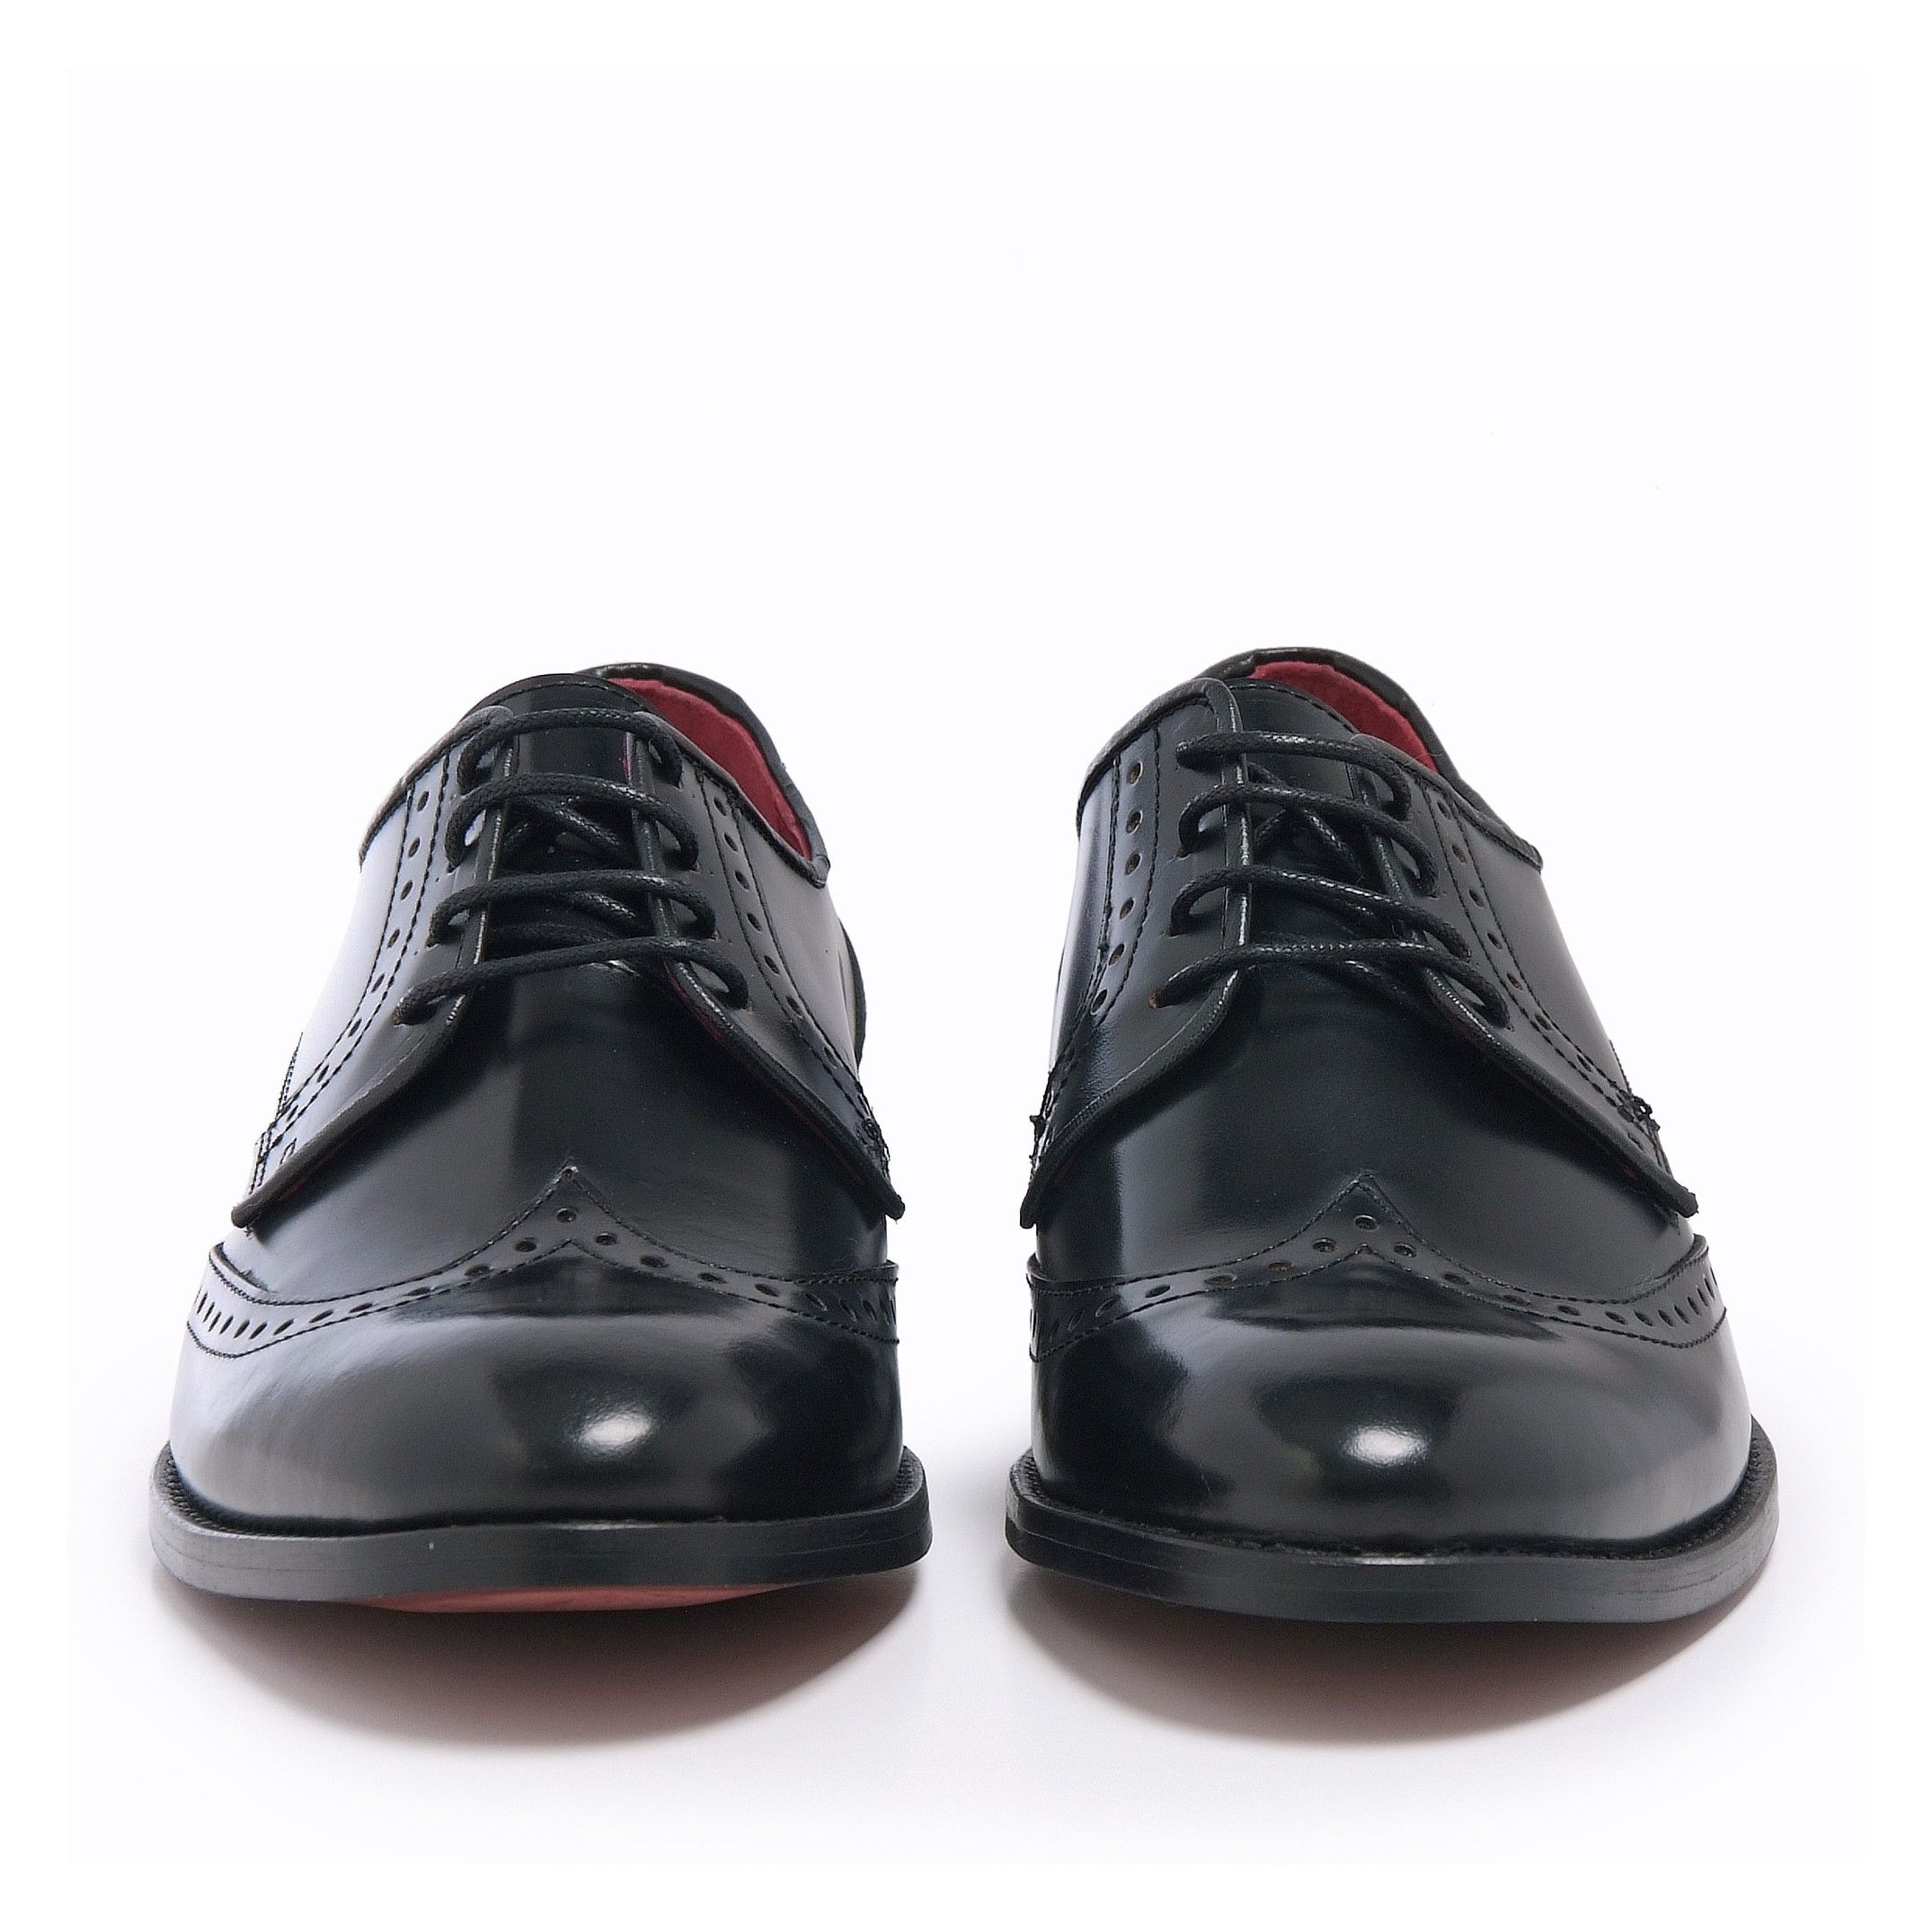 Blucher leather shoes. Upper and inner made of leather. Rubber sole. Made in Spain. By Castellanisimos